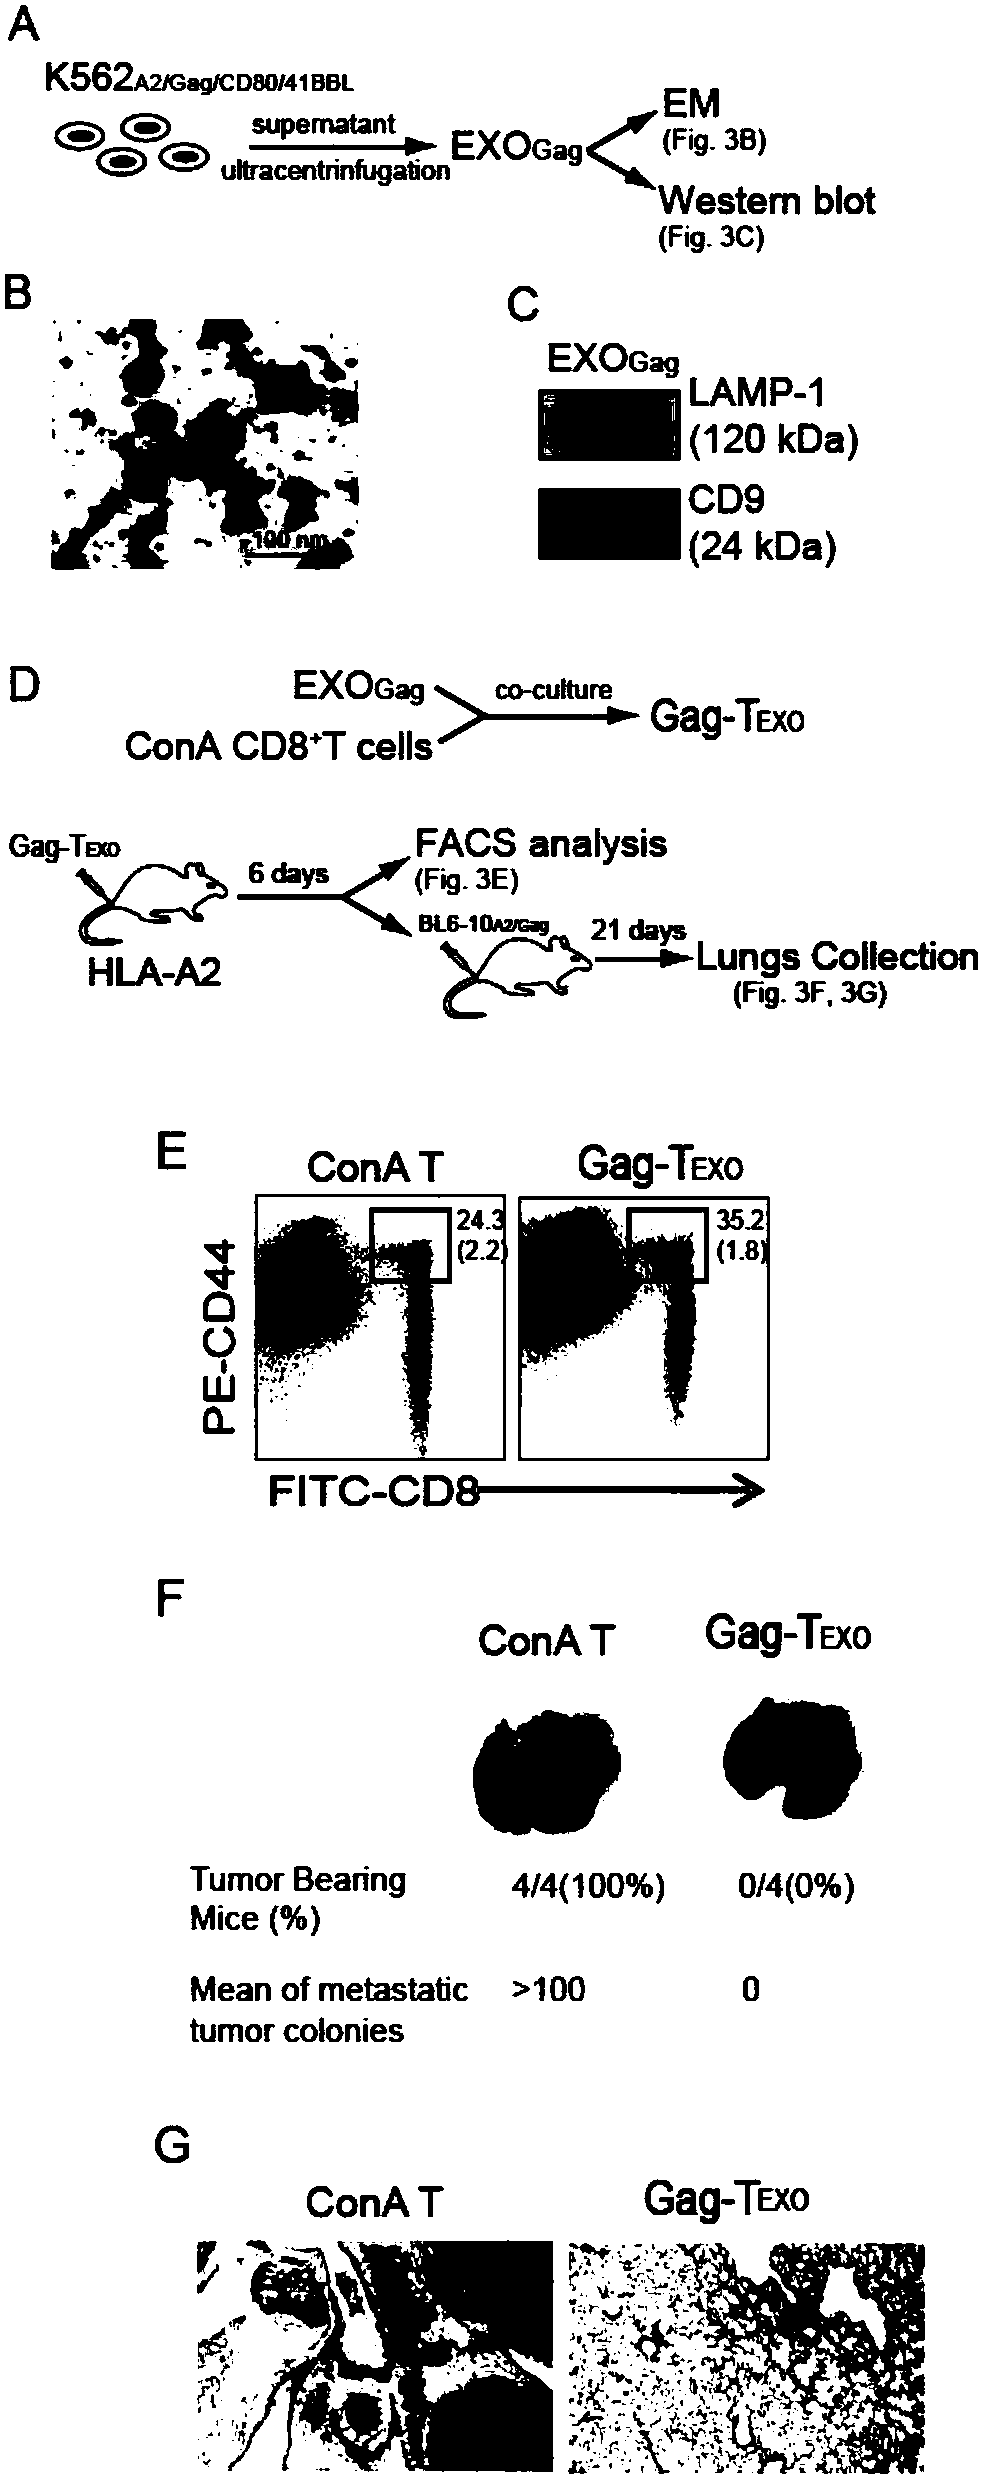 T cell vaccine constructed by secretory component of gene engineering-based aAPC (artificial Antigen Presenting Cell) as well as preparation method and application thereof